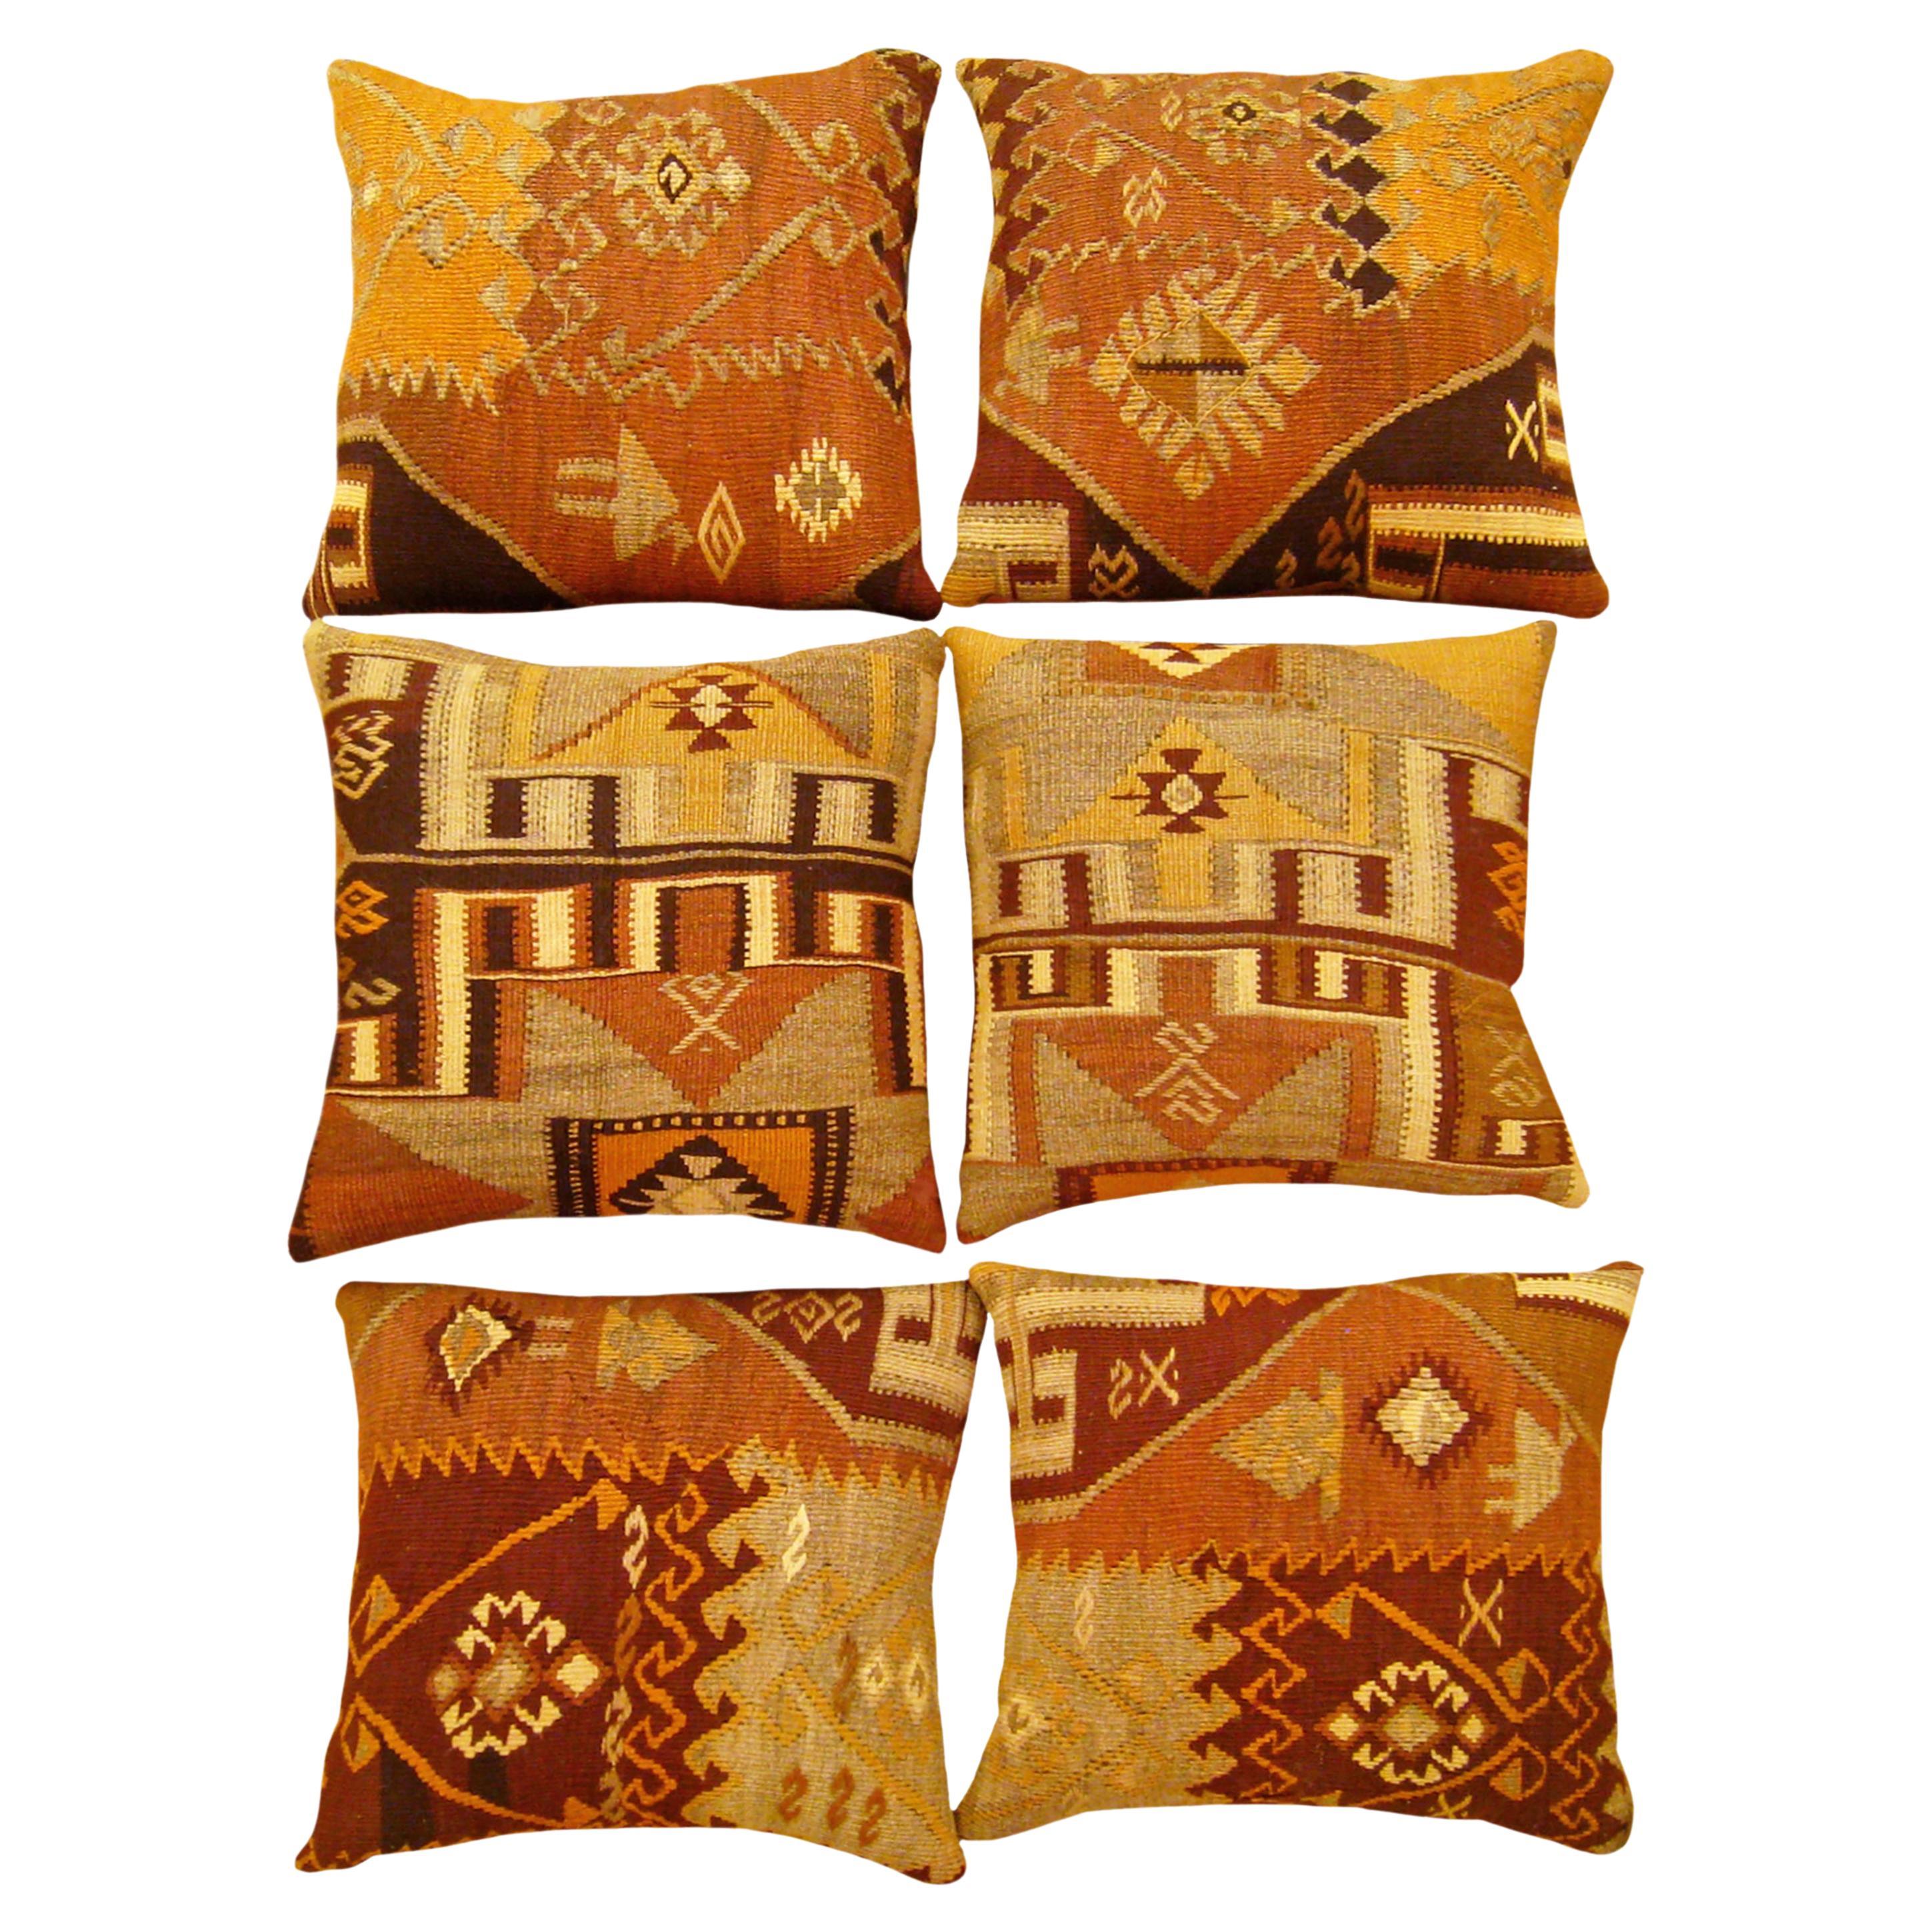 Set of Decorative Vintage Turkish Kilim Rug Pillows with Geometric Abstracts